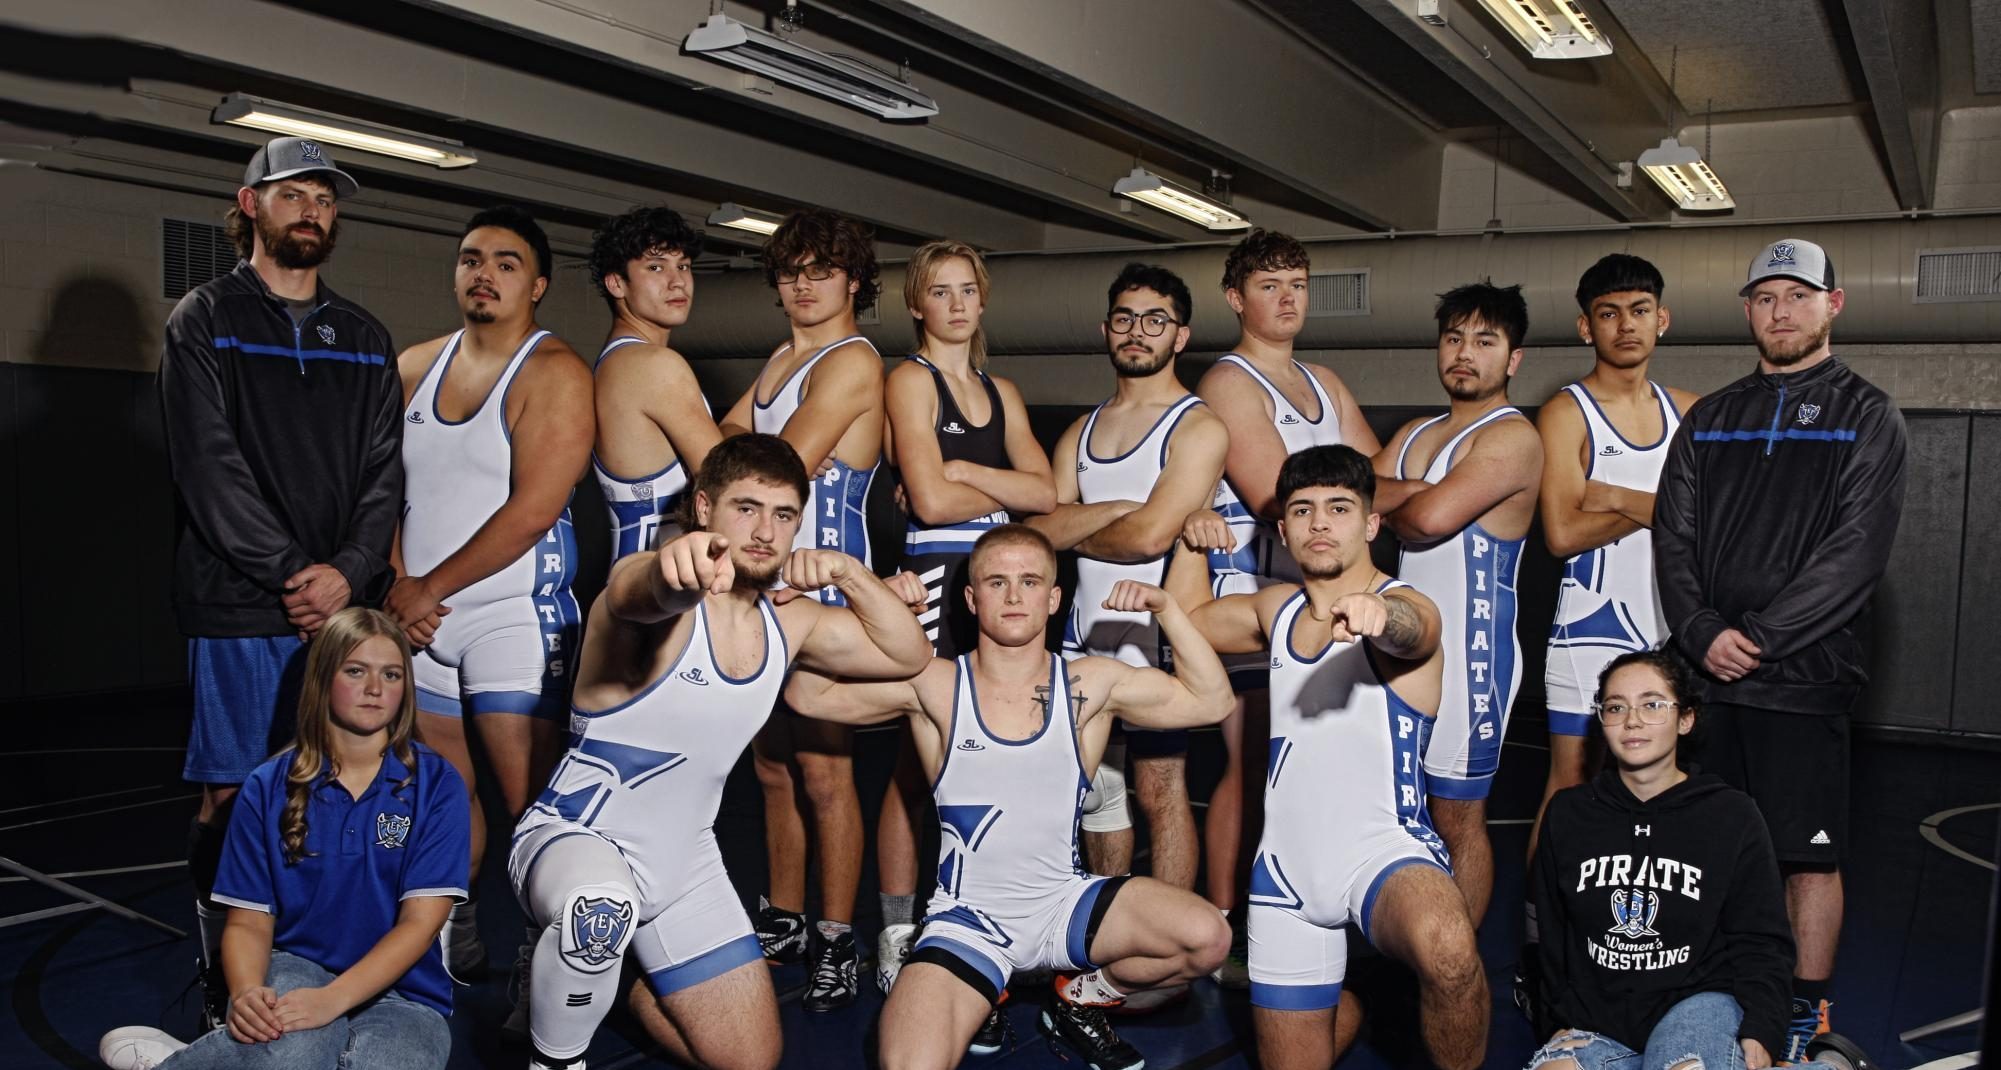 EHS boasts a large wrestling team with a lot of talent. The team is led by Jayce Prante and Eli Cortez. We currently have three ranked kids in the state, Coach Matthew Burton said. 